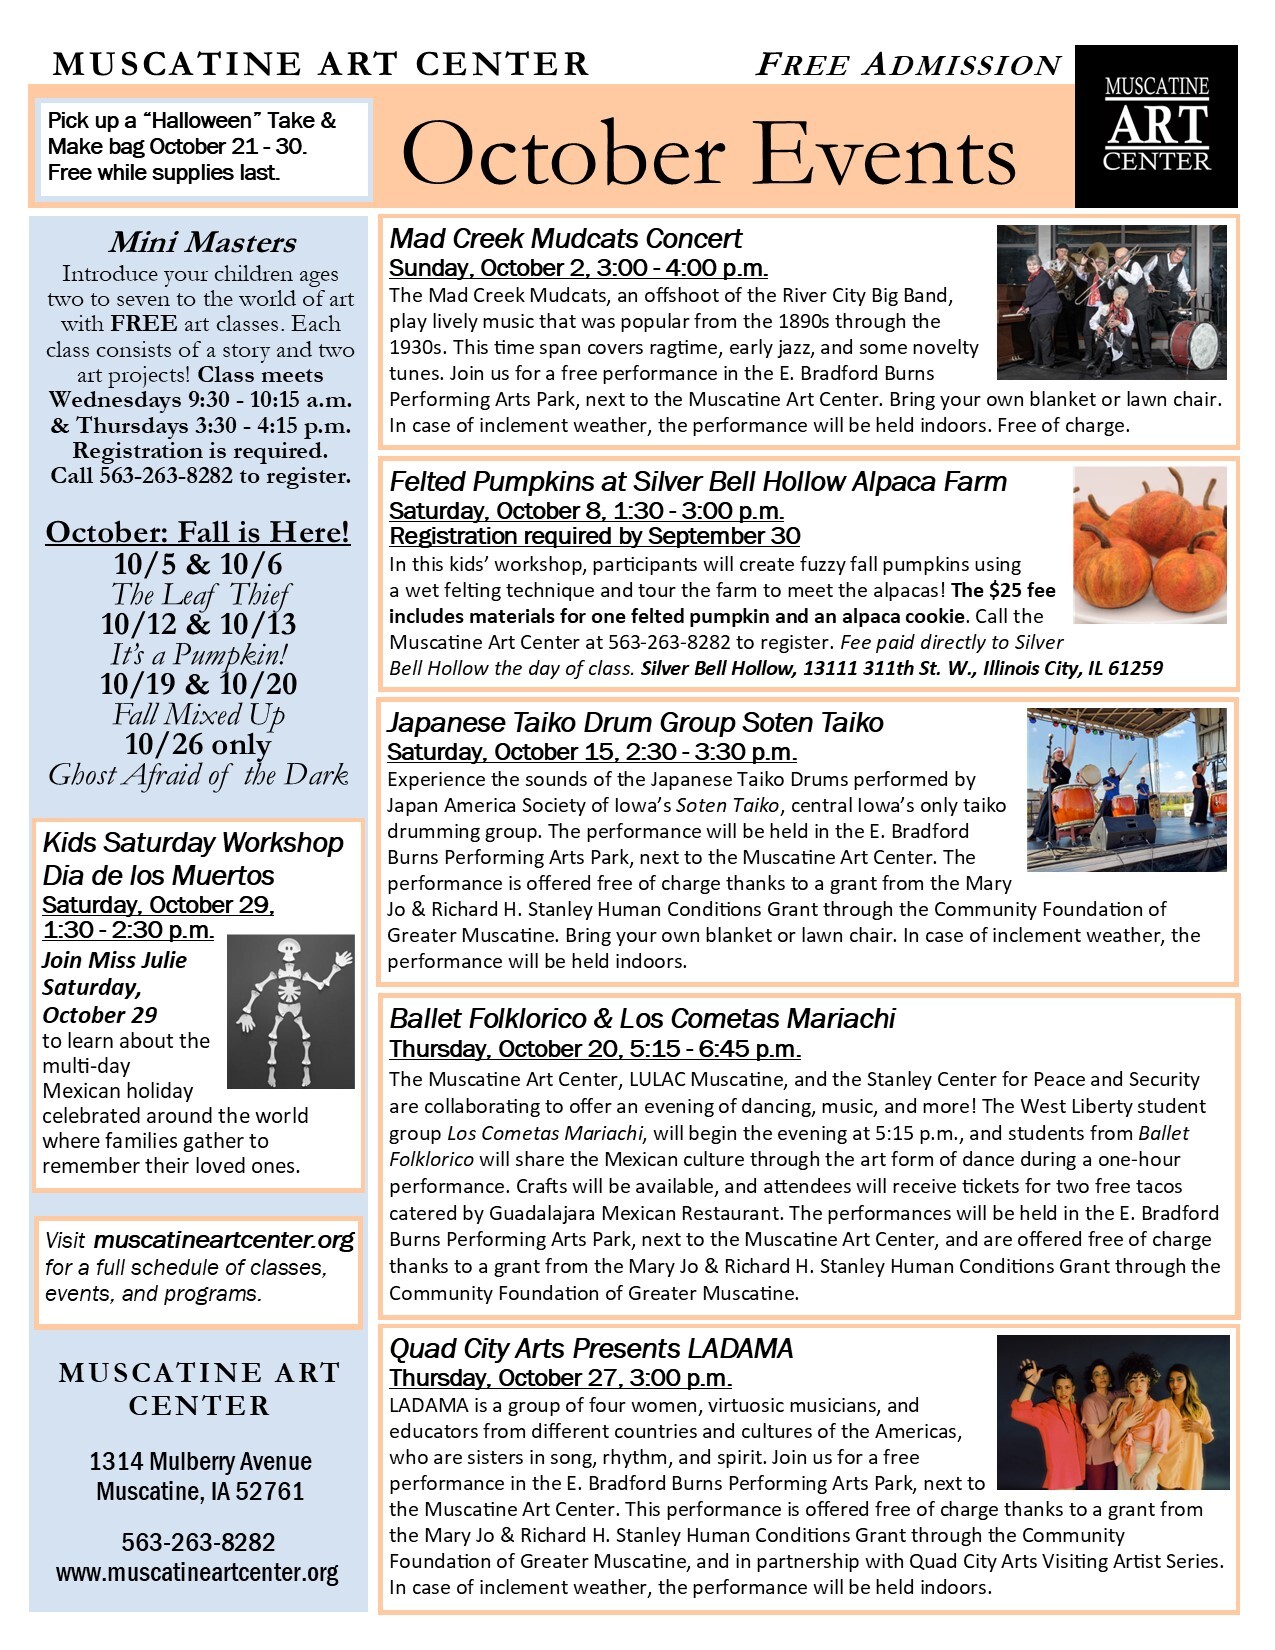 OCTOBER EVENTS Image